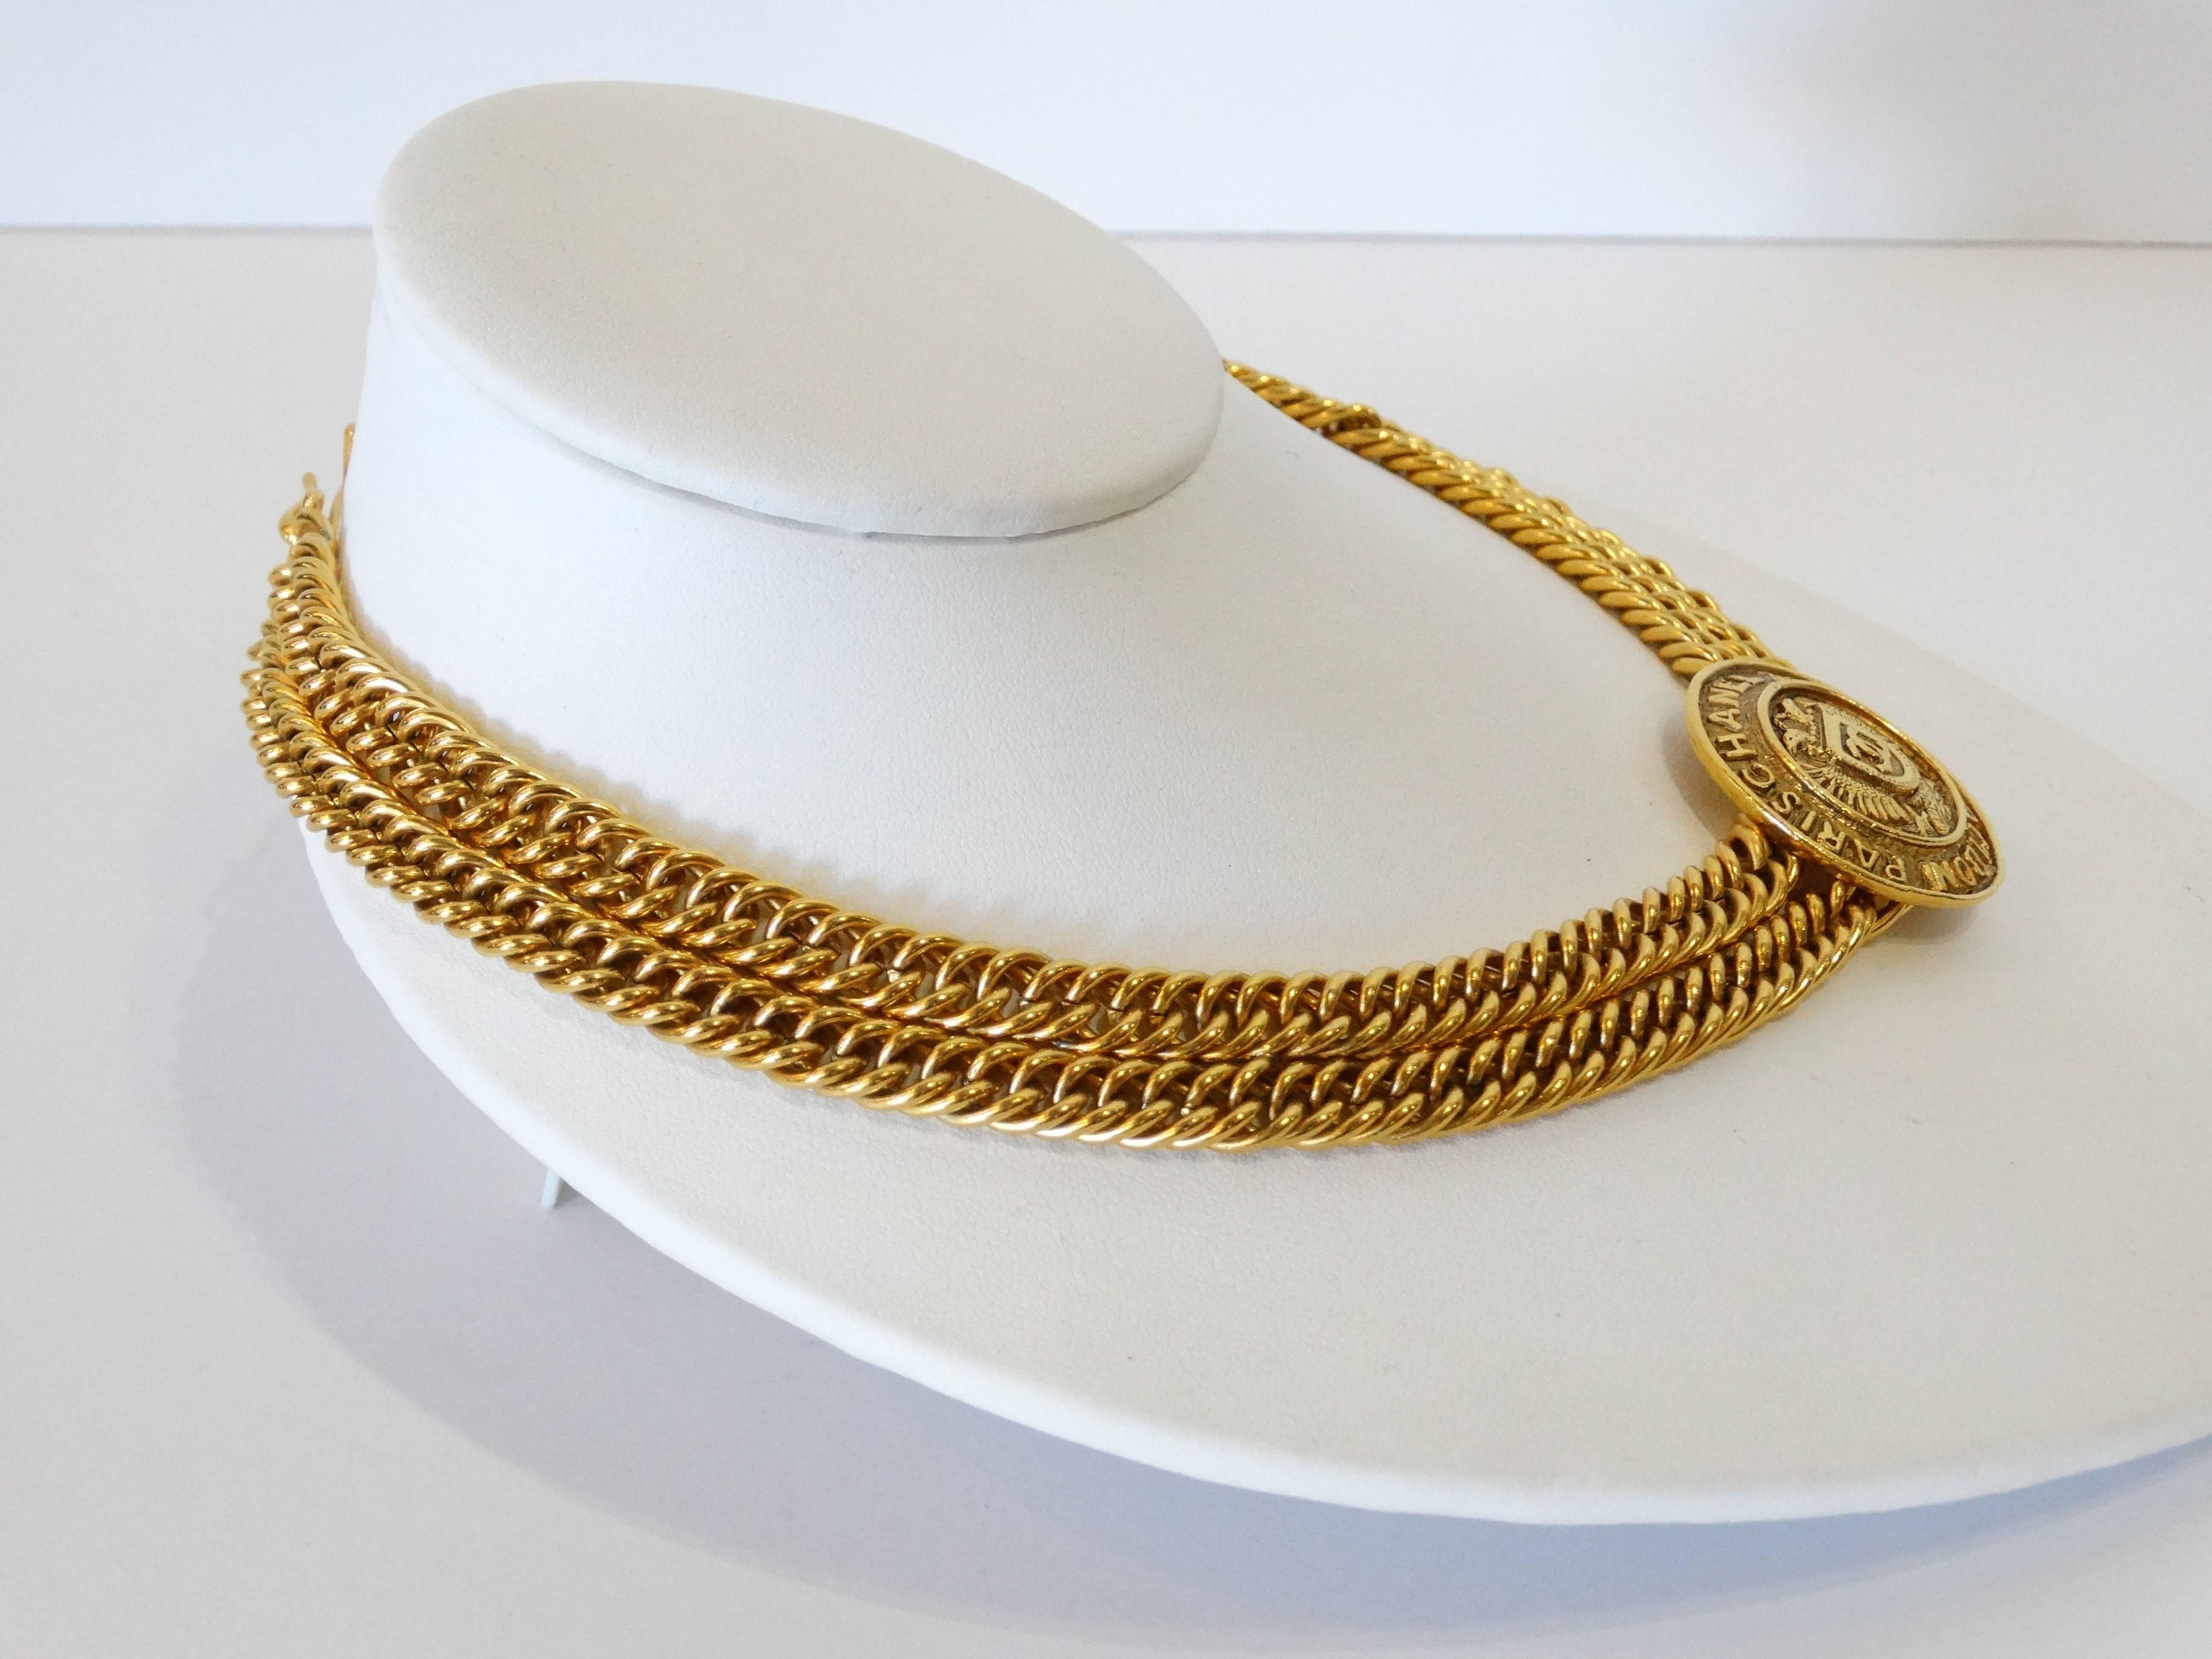 Incredible Chanel choker from the 1980s. Two thick chains with Medallion charm cast in a brilliant gold metal. Medallion boasts Crest encompassed with Paris Chanel 31 Rue Cambon Hook closure at the back of the neck. Signature on the back of the